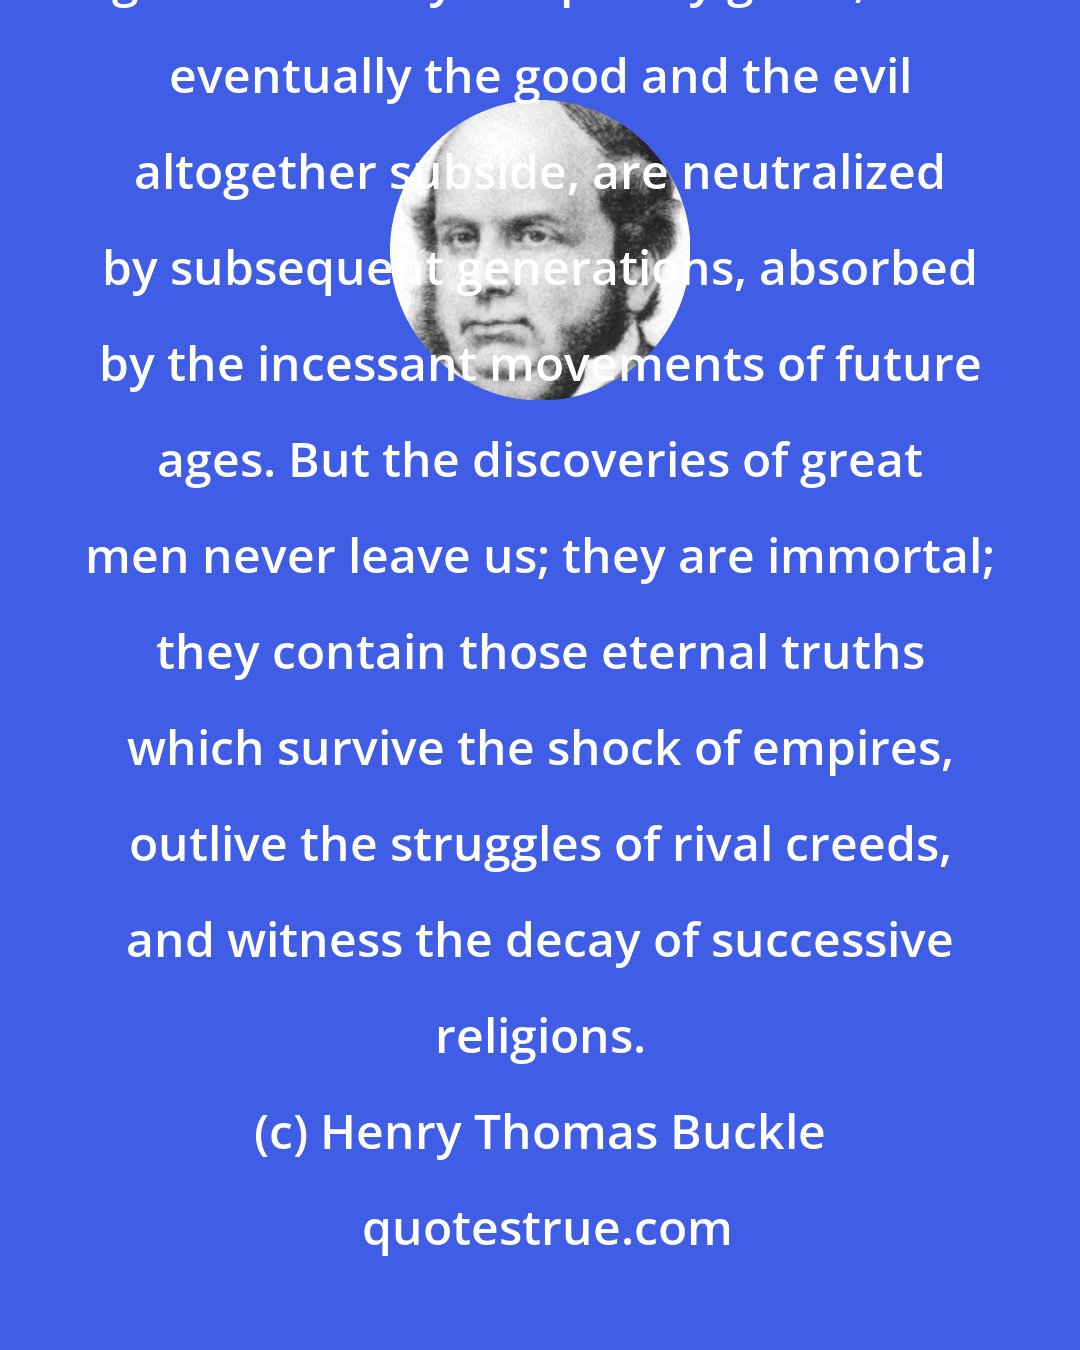 Henry Thomas Buckle: The actions of bad men produce only temporary evil, the actions of good men only temporary good ; and eventually the good and the evil altogether subside, are neutralized by subsequent generations, absorbed by the incessant movements of future ages. But the discoveries of great men never leave us; they are immortal; they contain those eternal truths which survive the shock of empires, outlive the struggles of rival creeds, and witness the decay of successive religions.